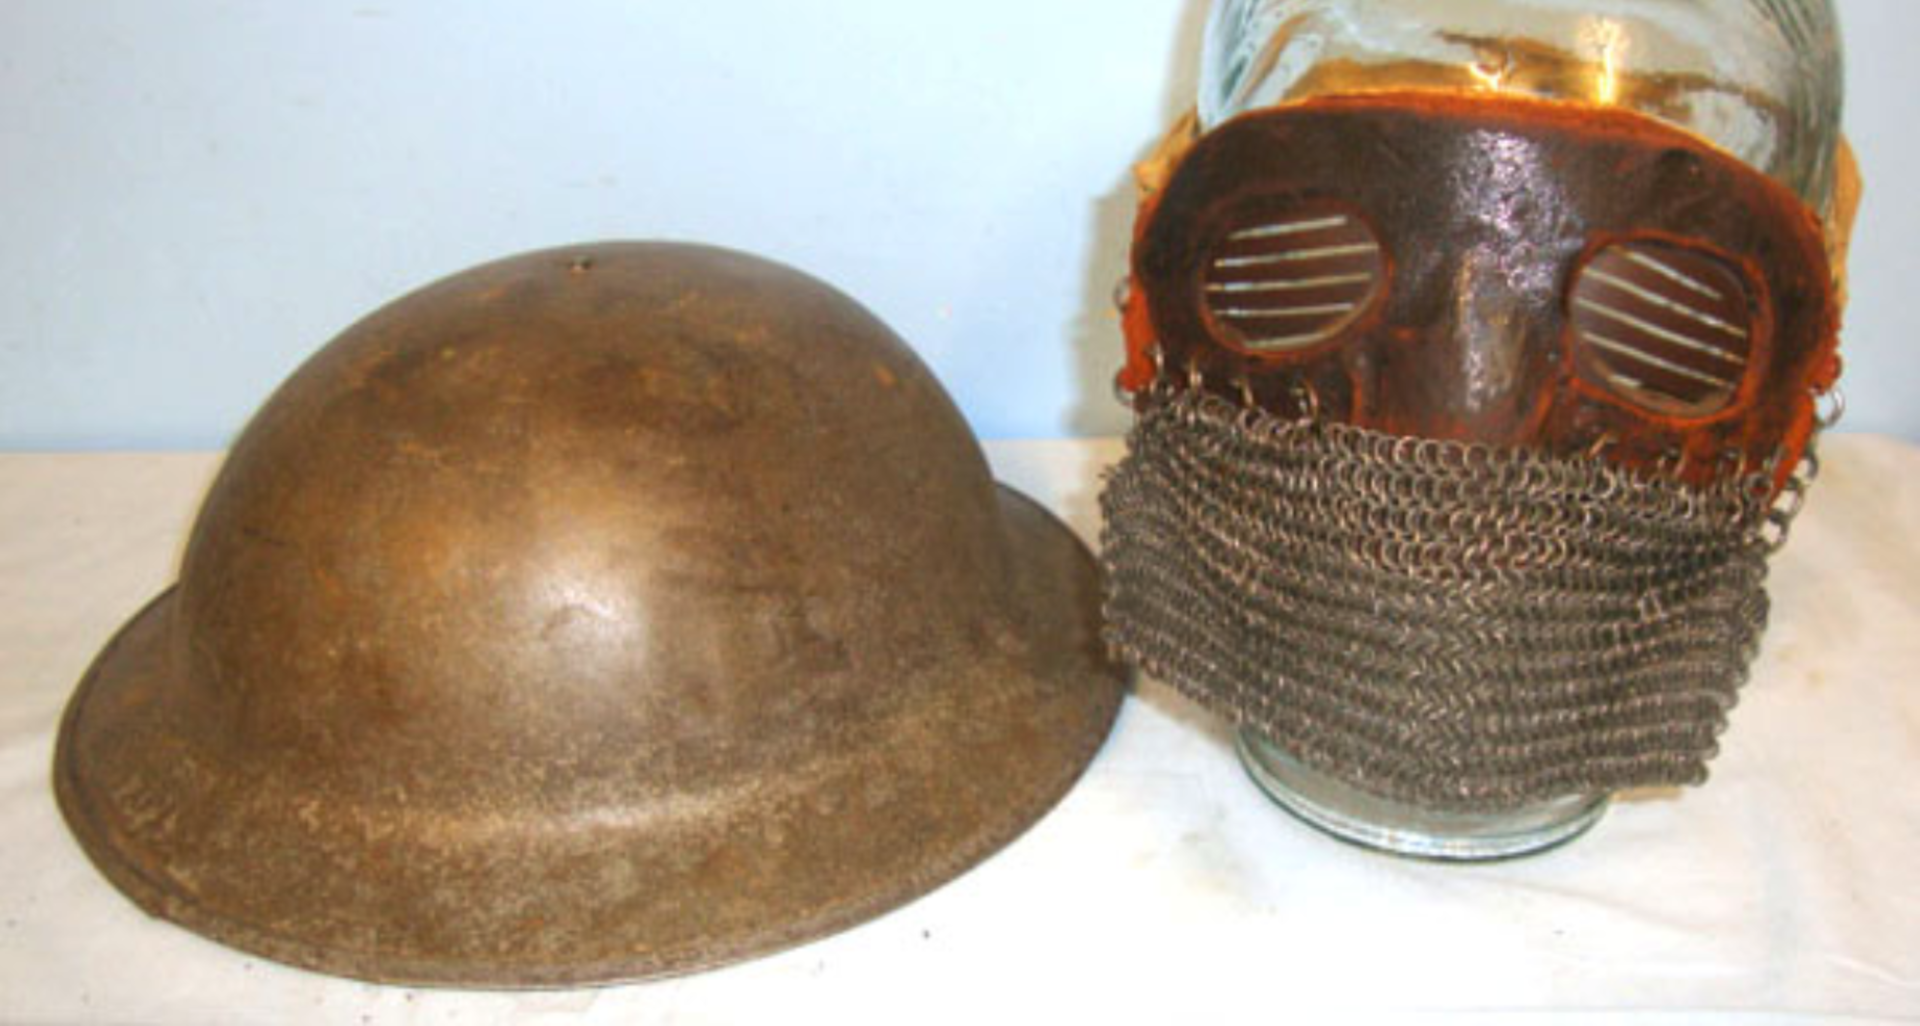 VERY RARE, WW1 British Tank DriverÕs Steel & Leather Splatter Face Mask With Chain Mail Veil - Image 3 of 3